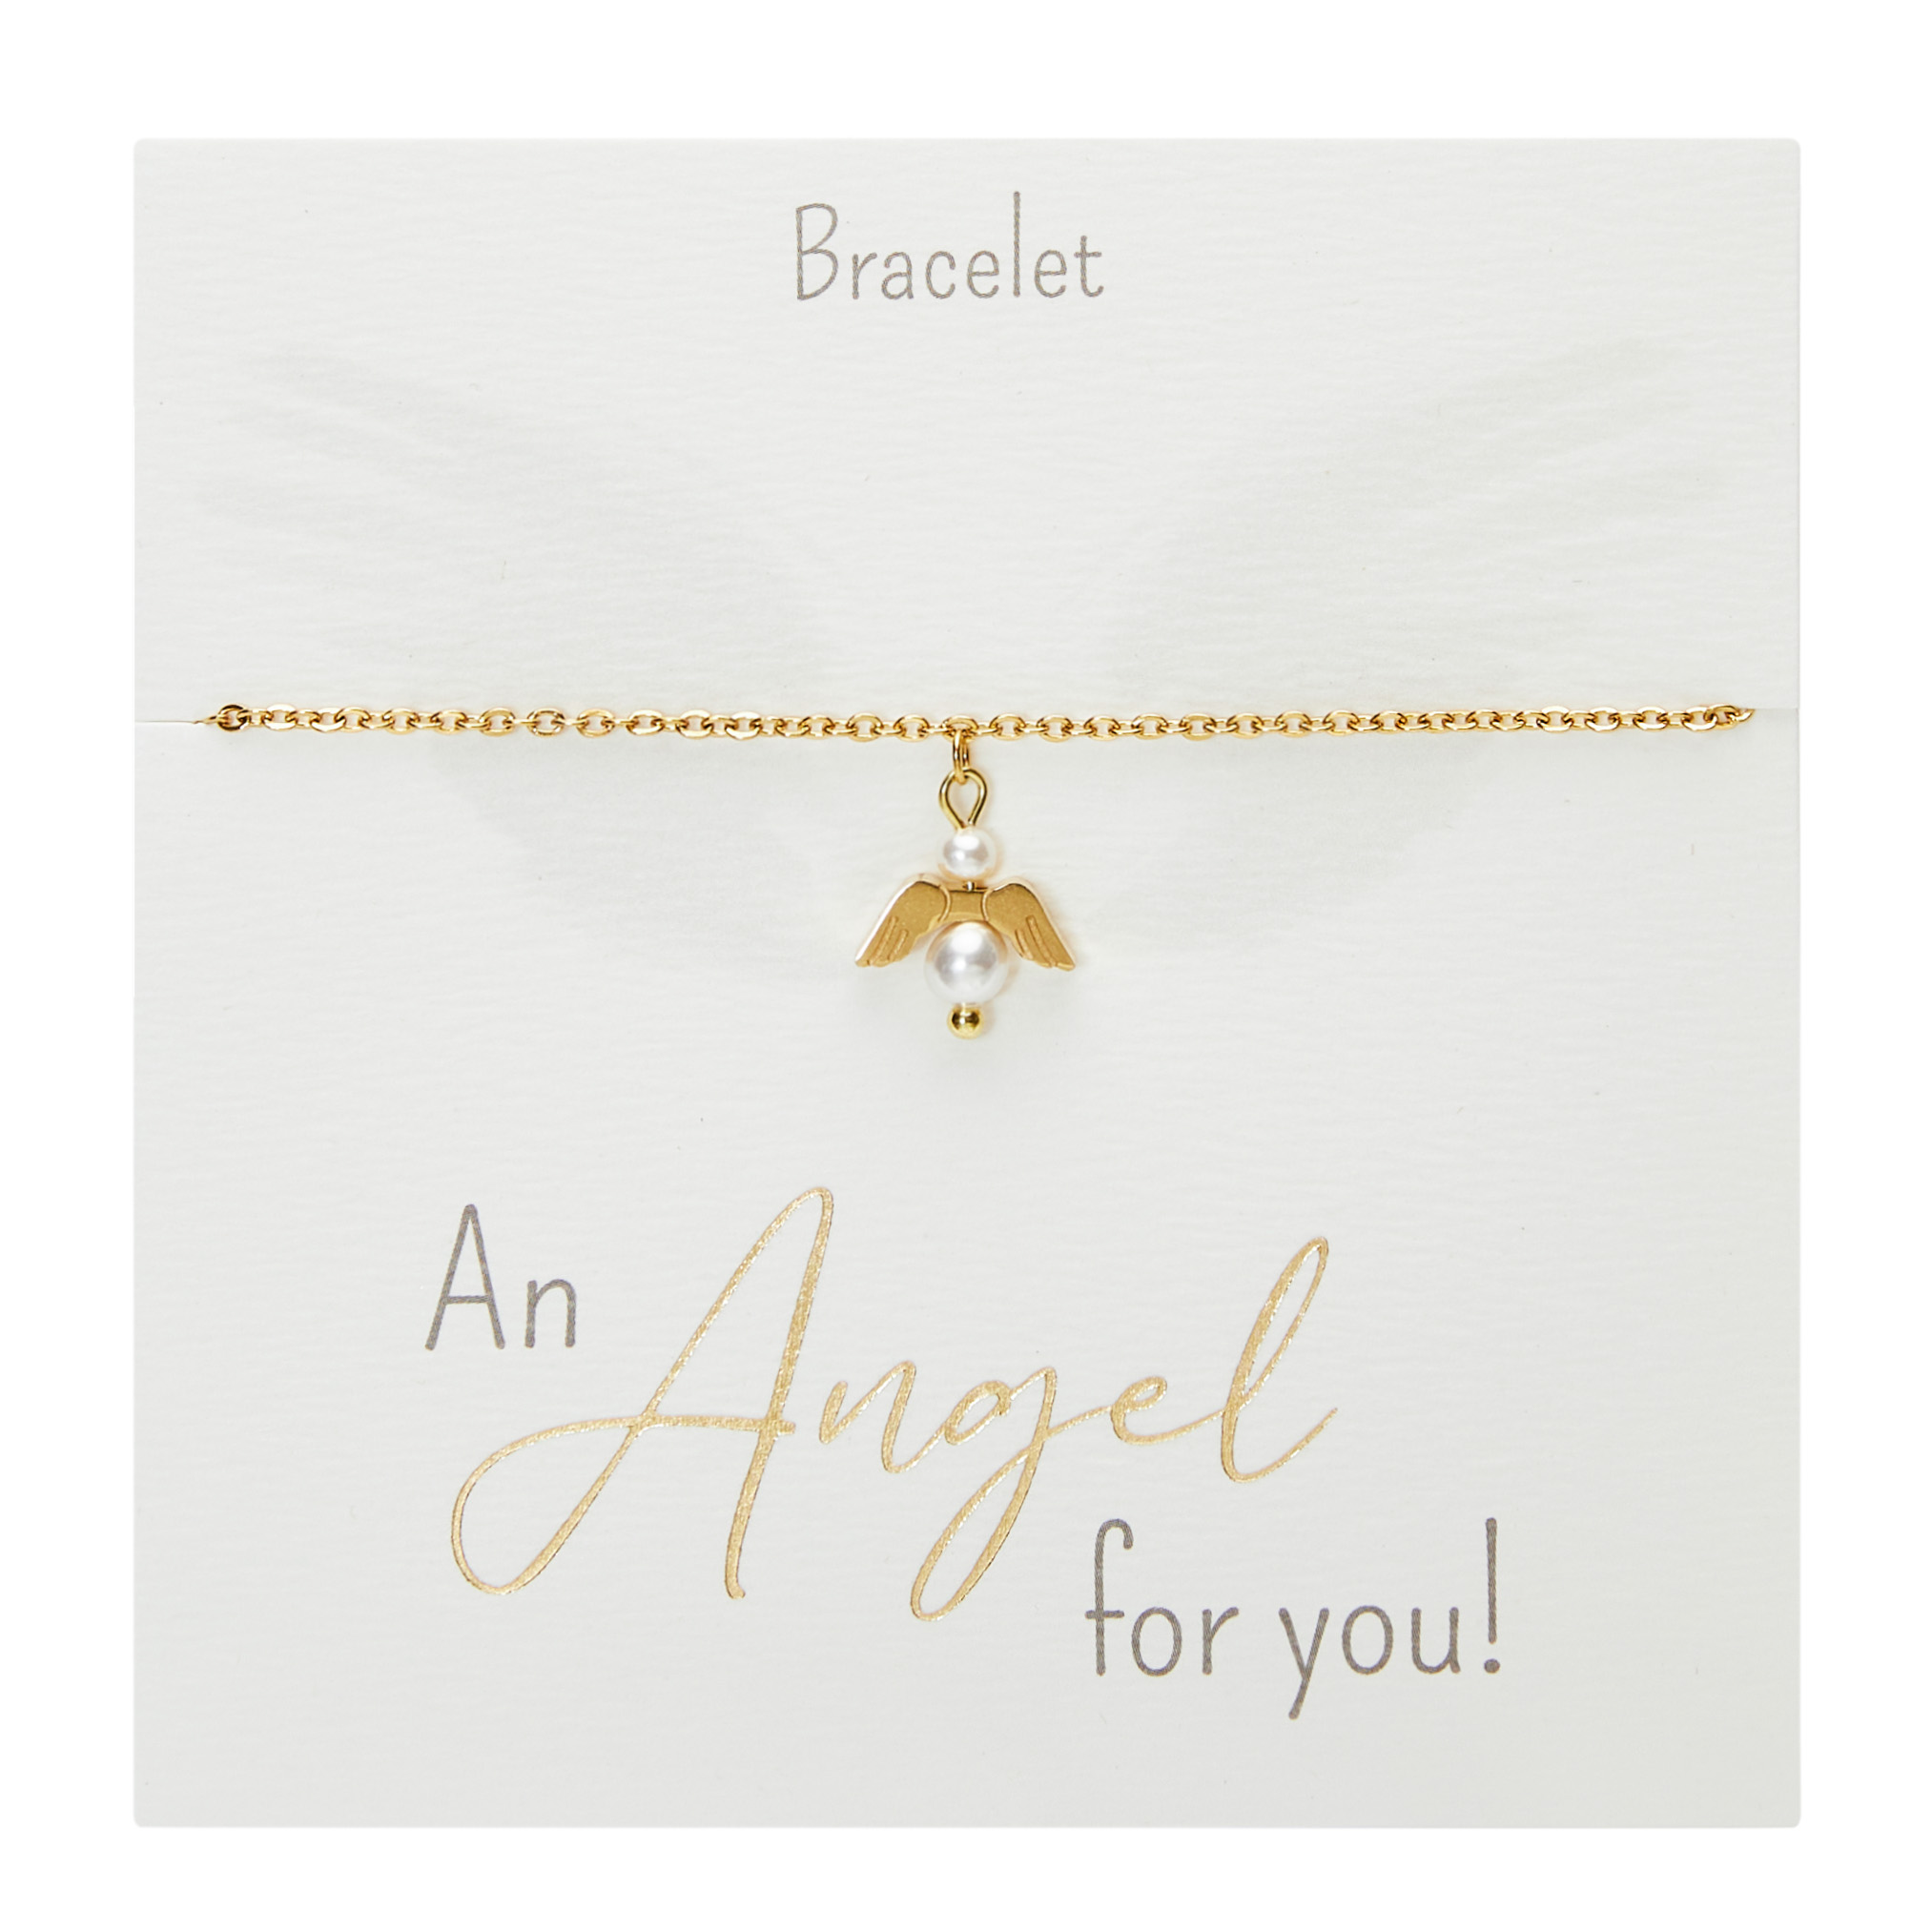 Display bracelets "An Angel for you"